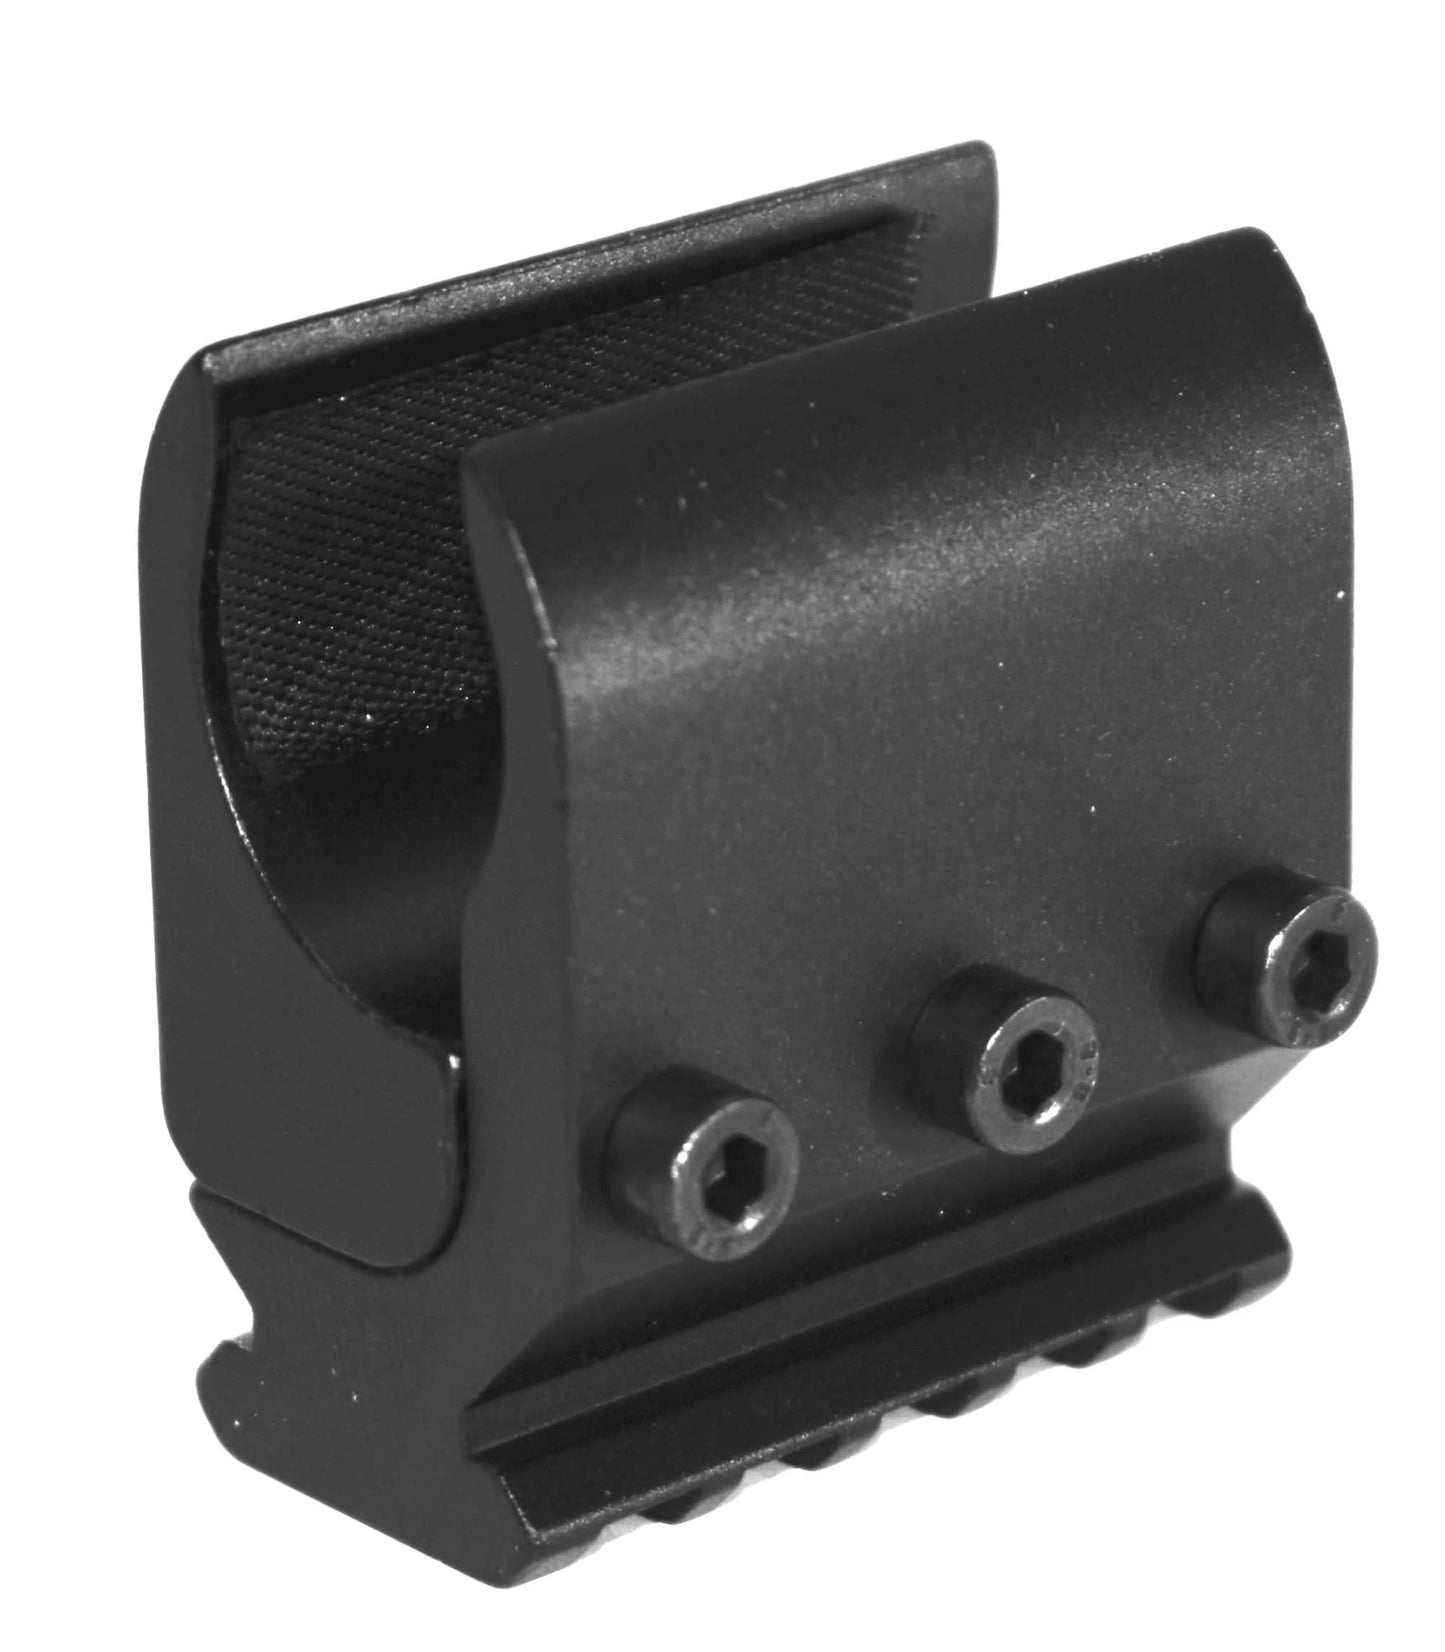 Trinity Picatinny Rail Mount Adapter Compatible with Winchester SXP Defender 12 Gauge Pump Sporting Optics Mount Aluminum Black Hunting Accessory Tactical Home Defense Upgrade Single Rail. - TRINITY SUPPLY INC